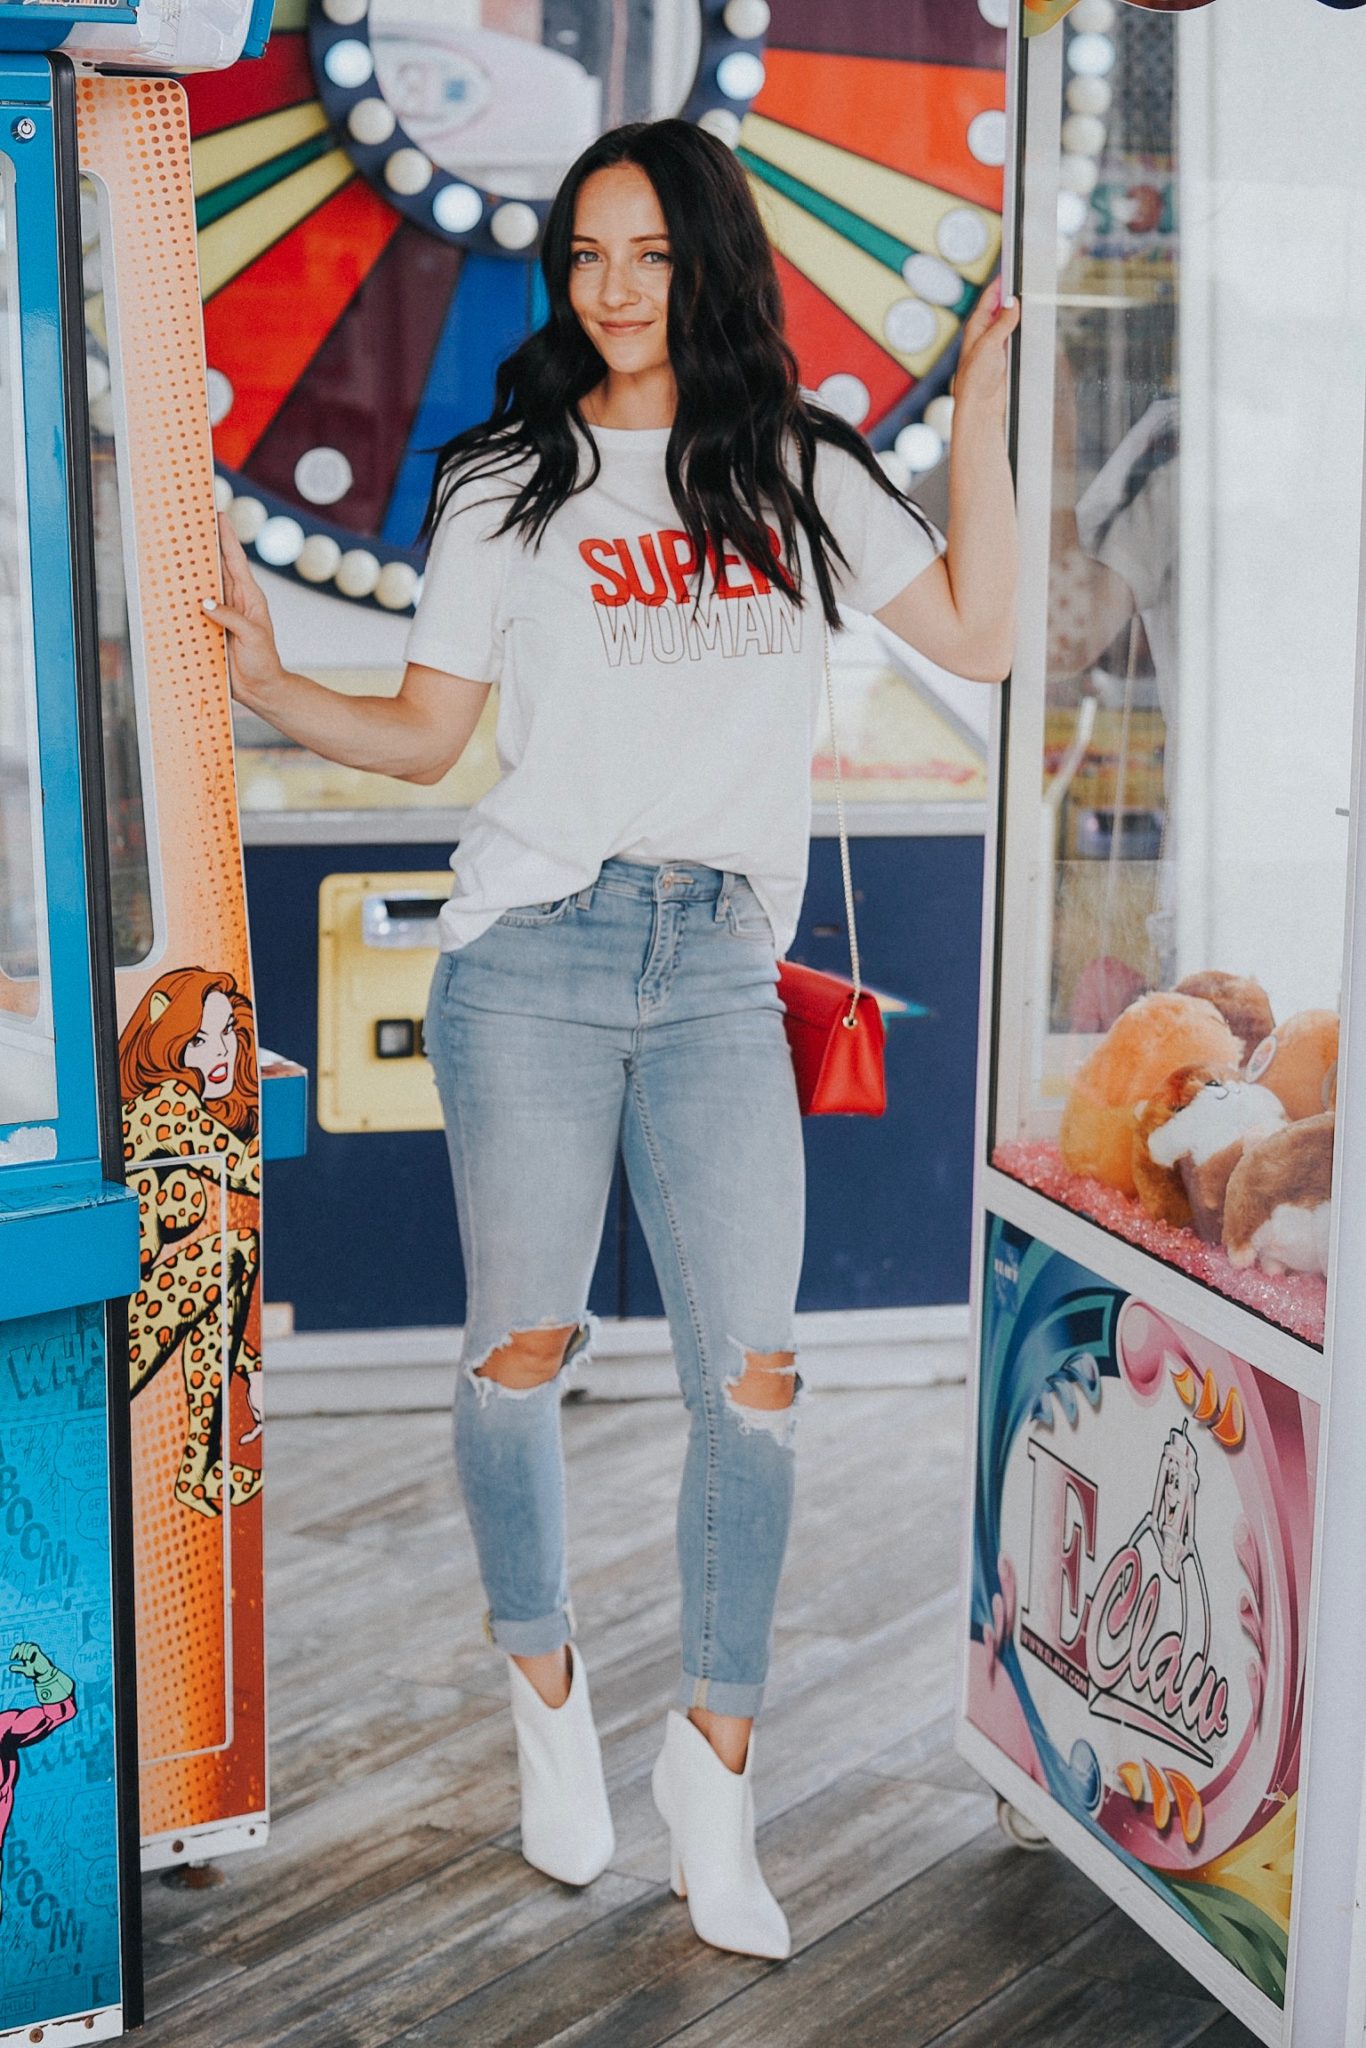 Rebeccah Minkoff Super Woman Tee Shirt styled by popular Las Vegas fashion blogger, Outfits & Outings